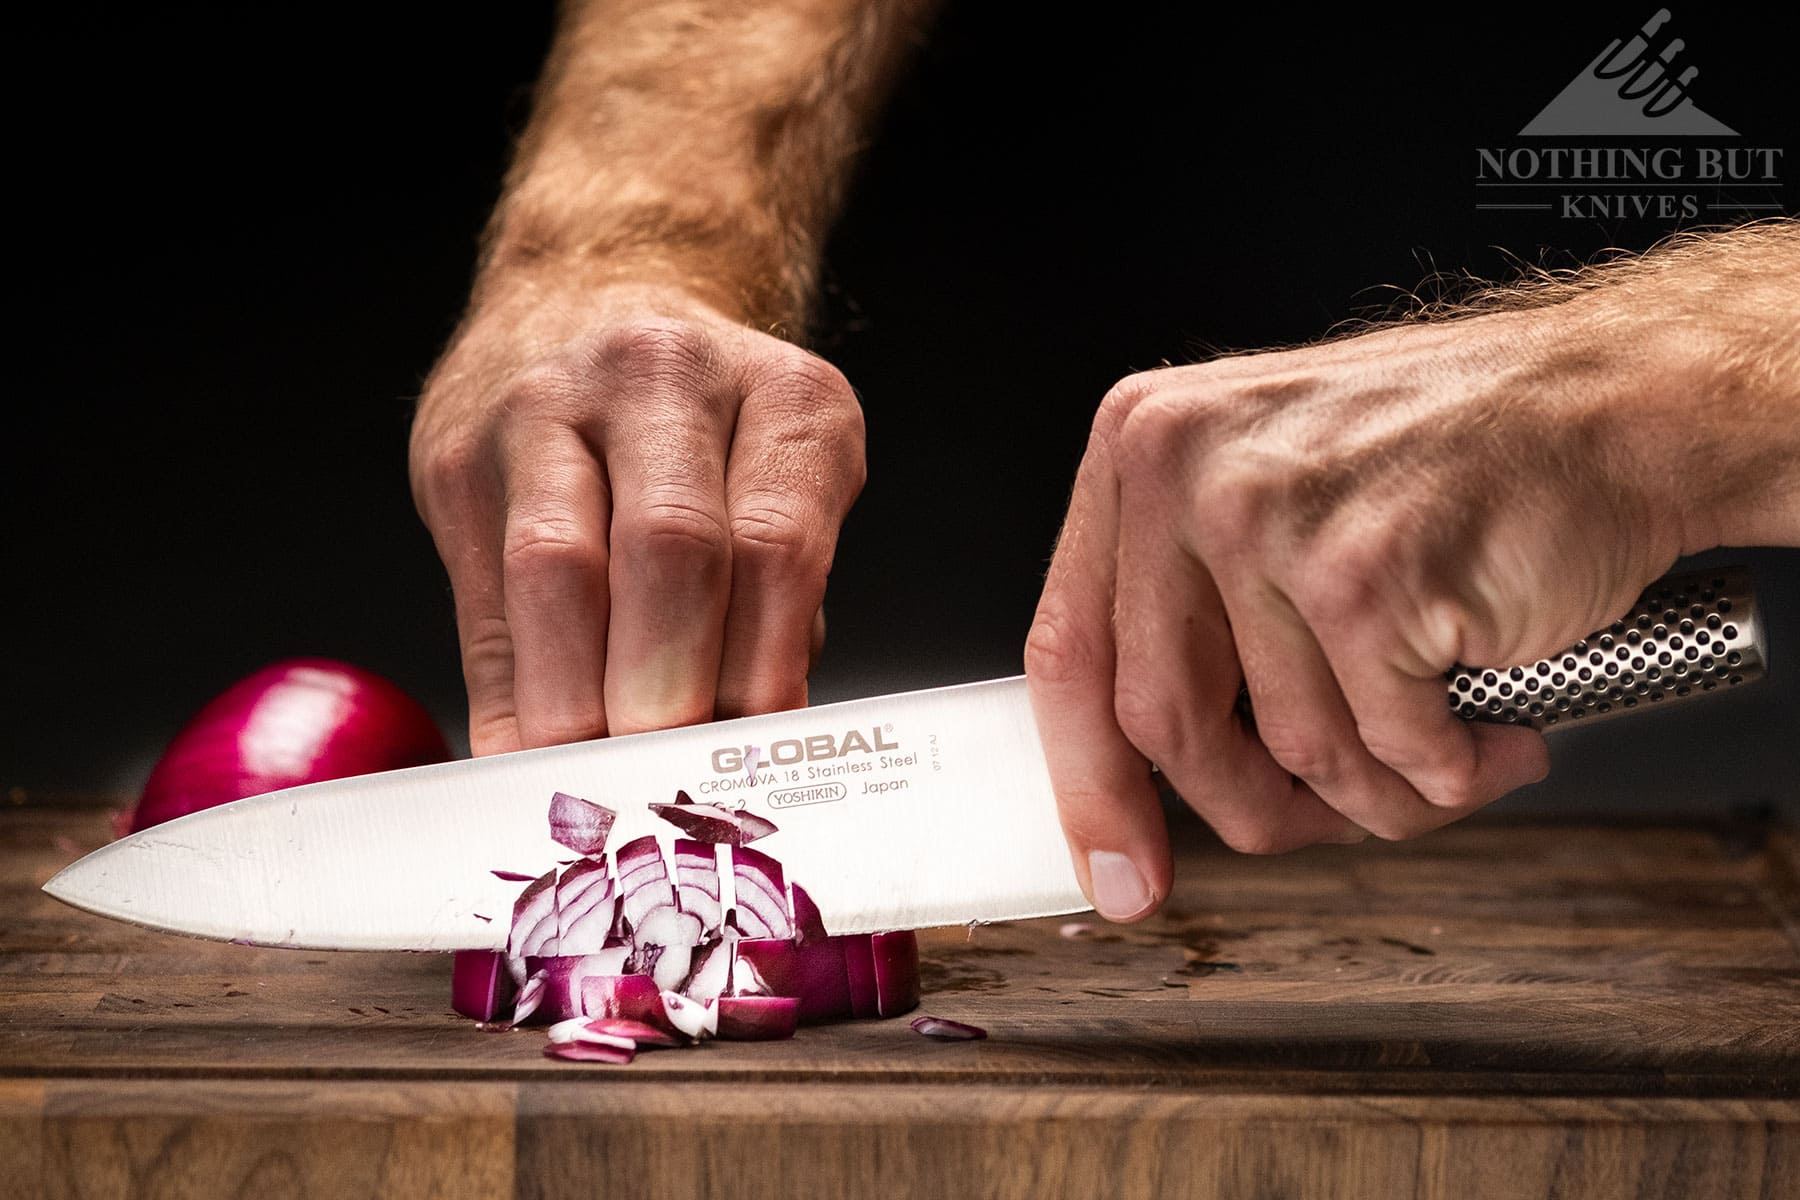 A Global G2 chef knife being held in a pinch grip dicing a red onion.